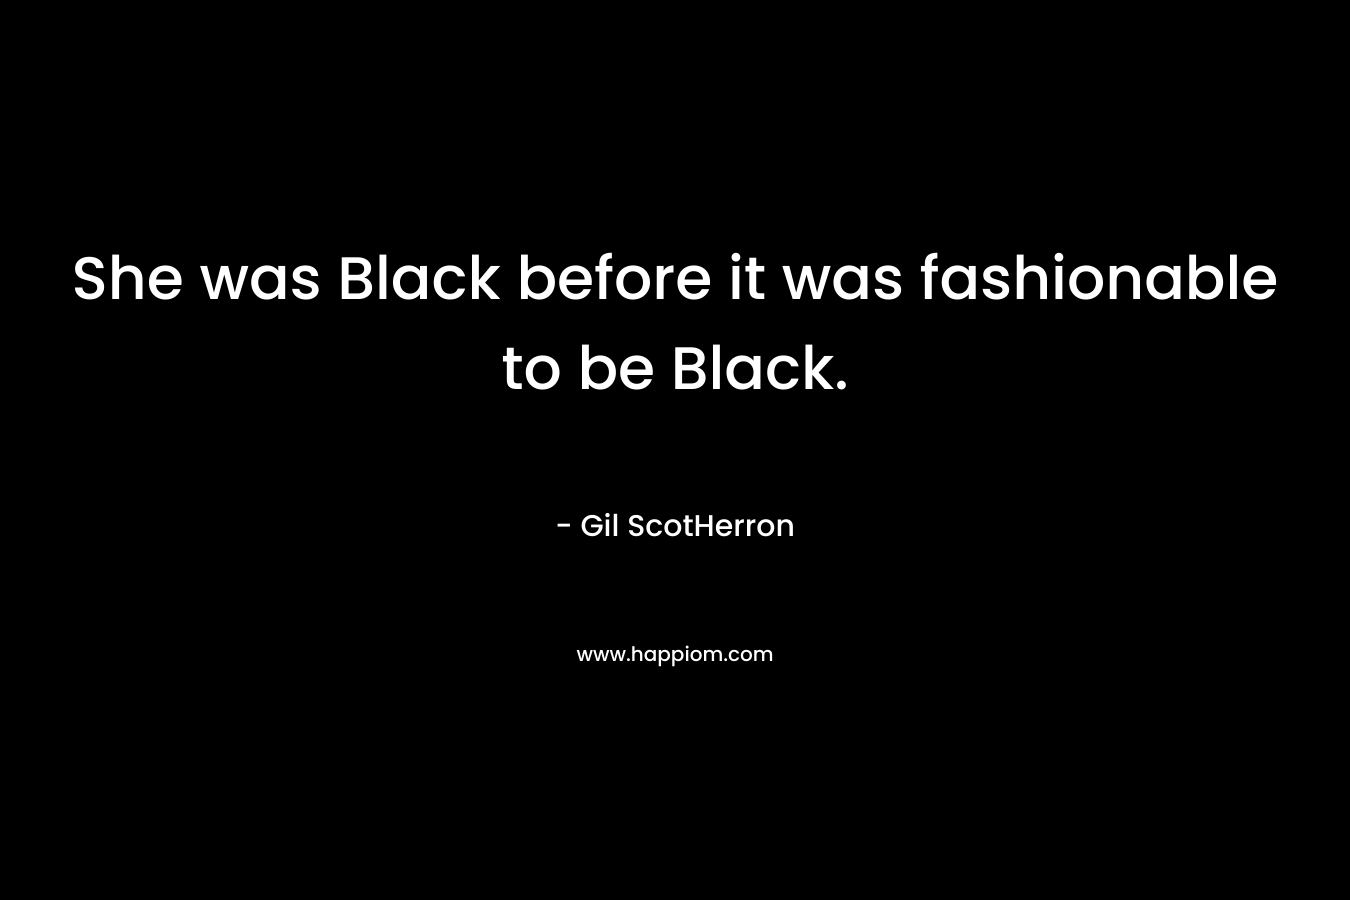 She was Black before it was fashionable to be Black. – Gil ScotHerron